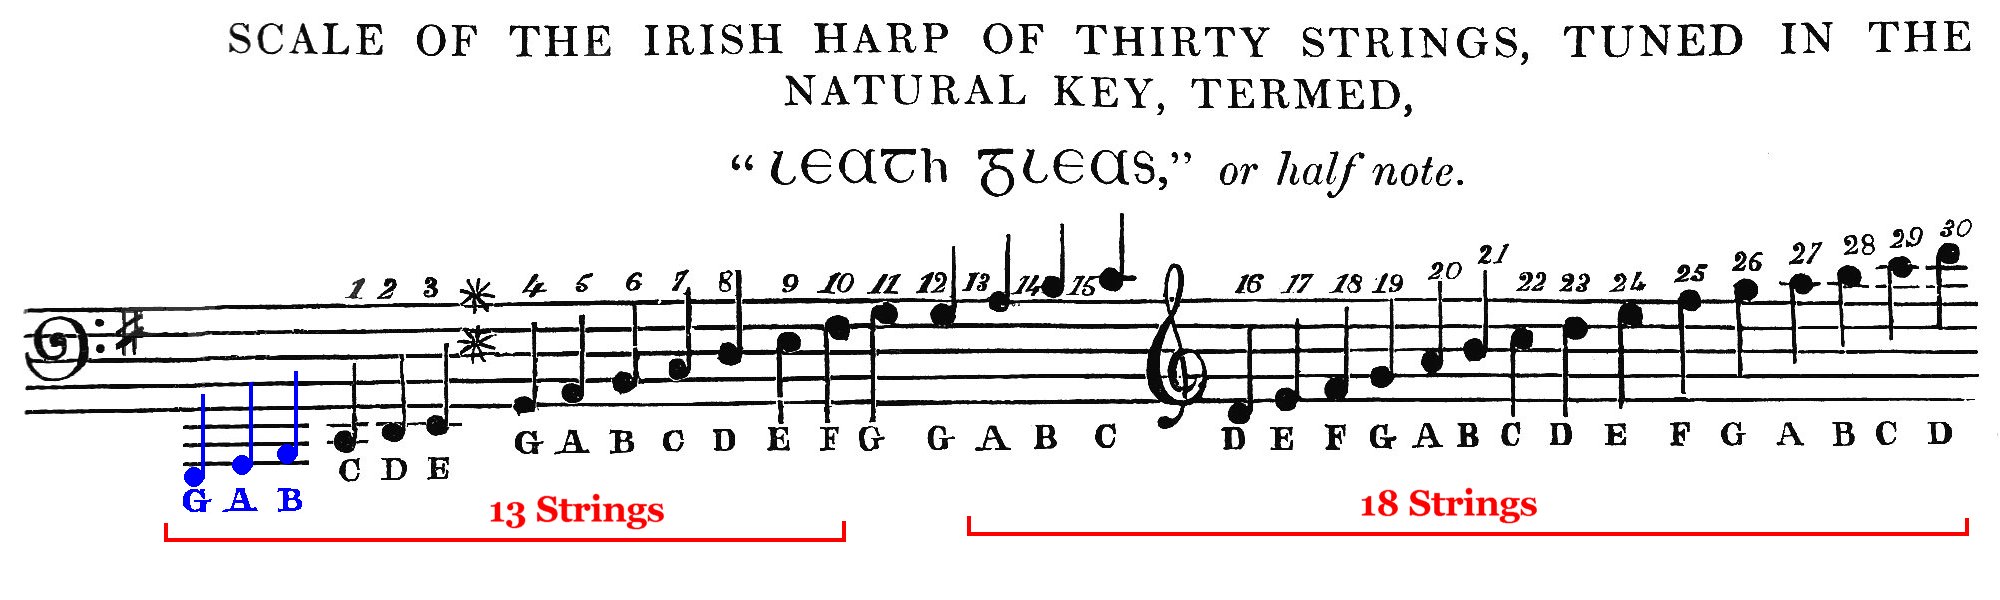 Tuning taken from The Ancient Music of Ireland